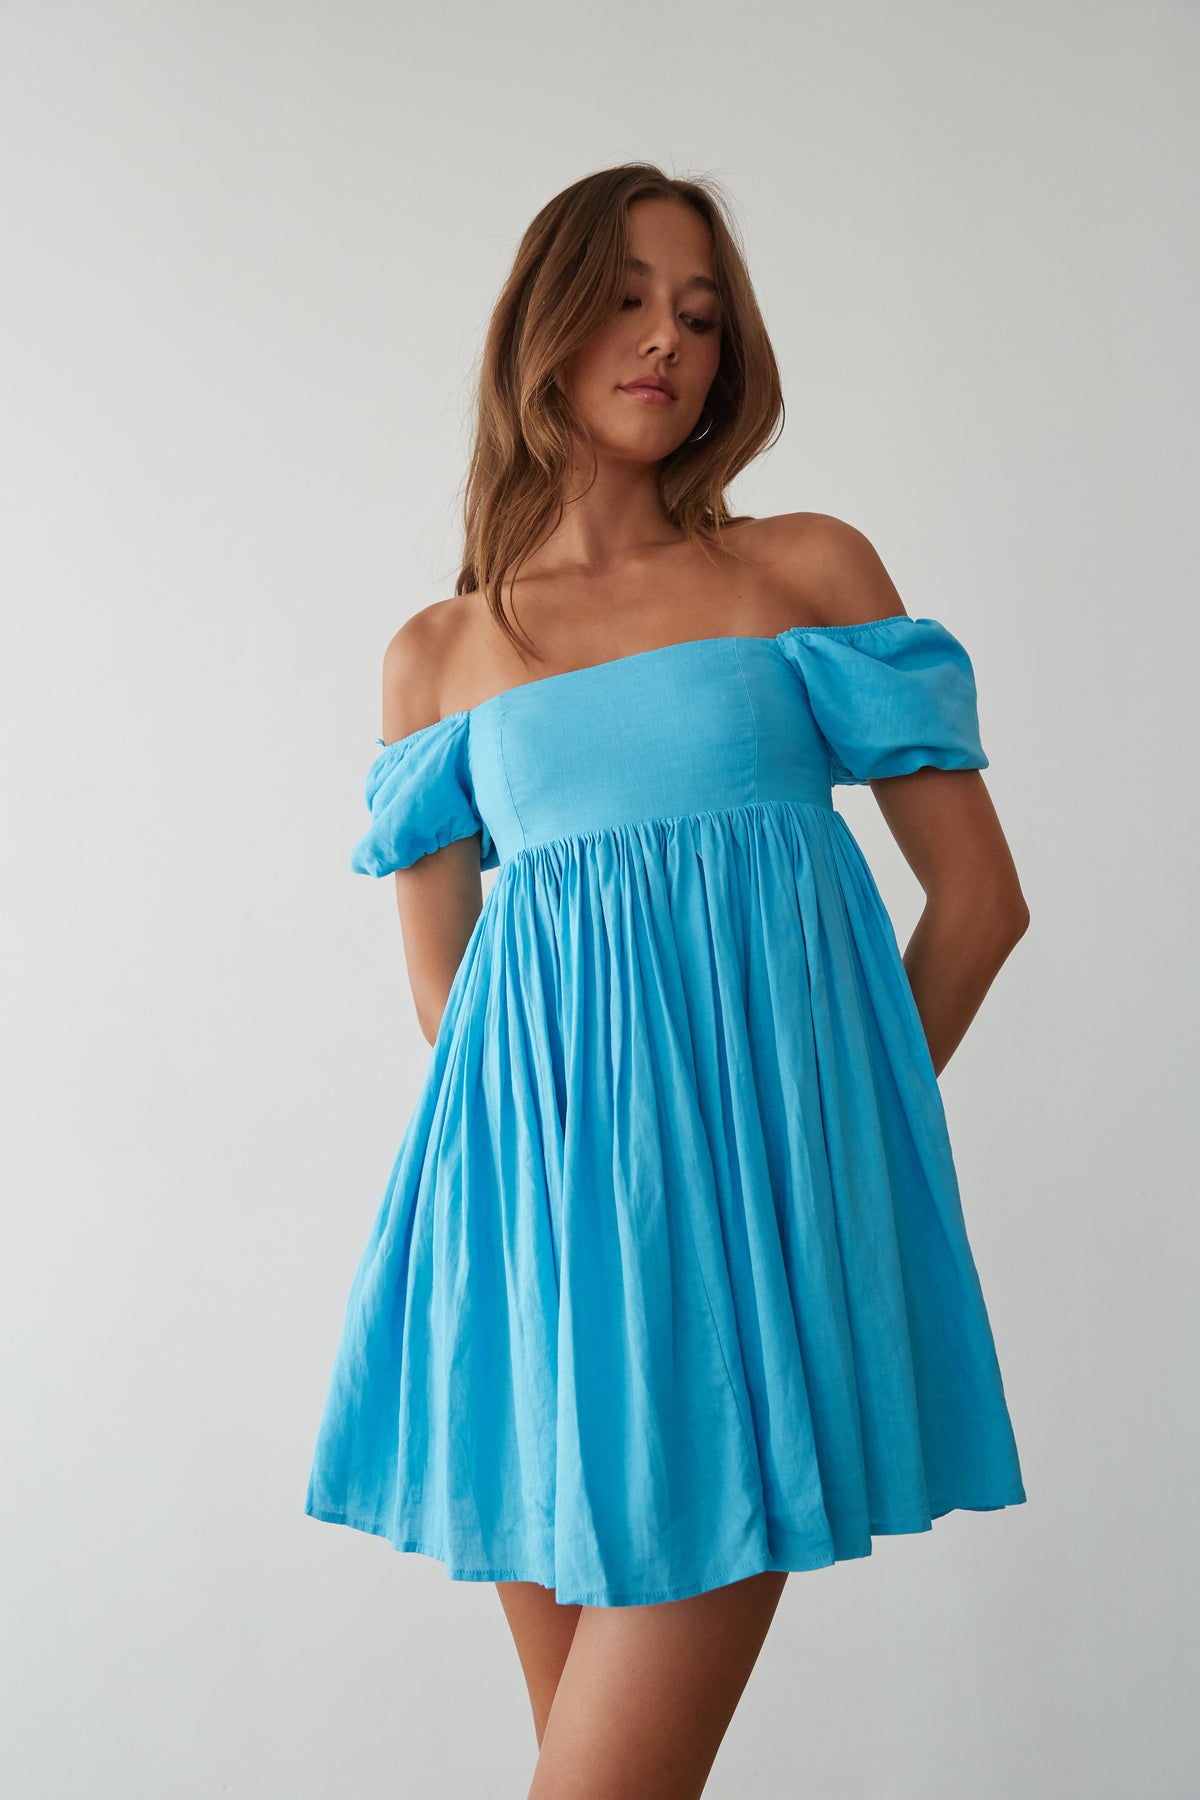 bright blue babydoll dress with ooff the shoulder puff sleeves and straight neckline